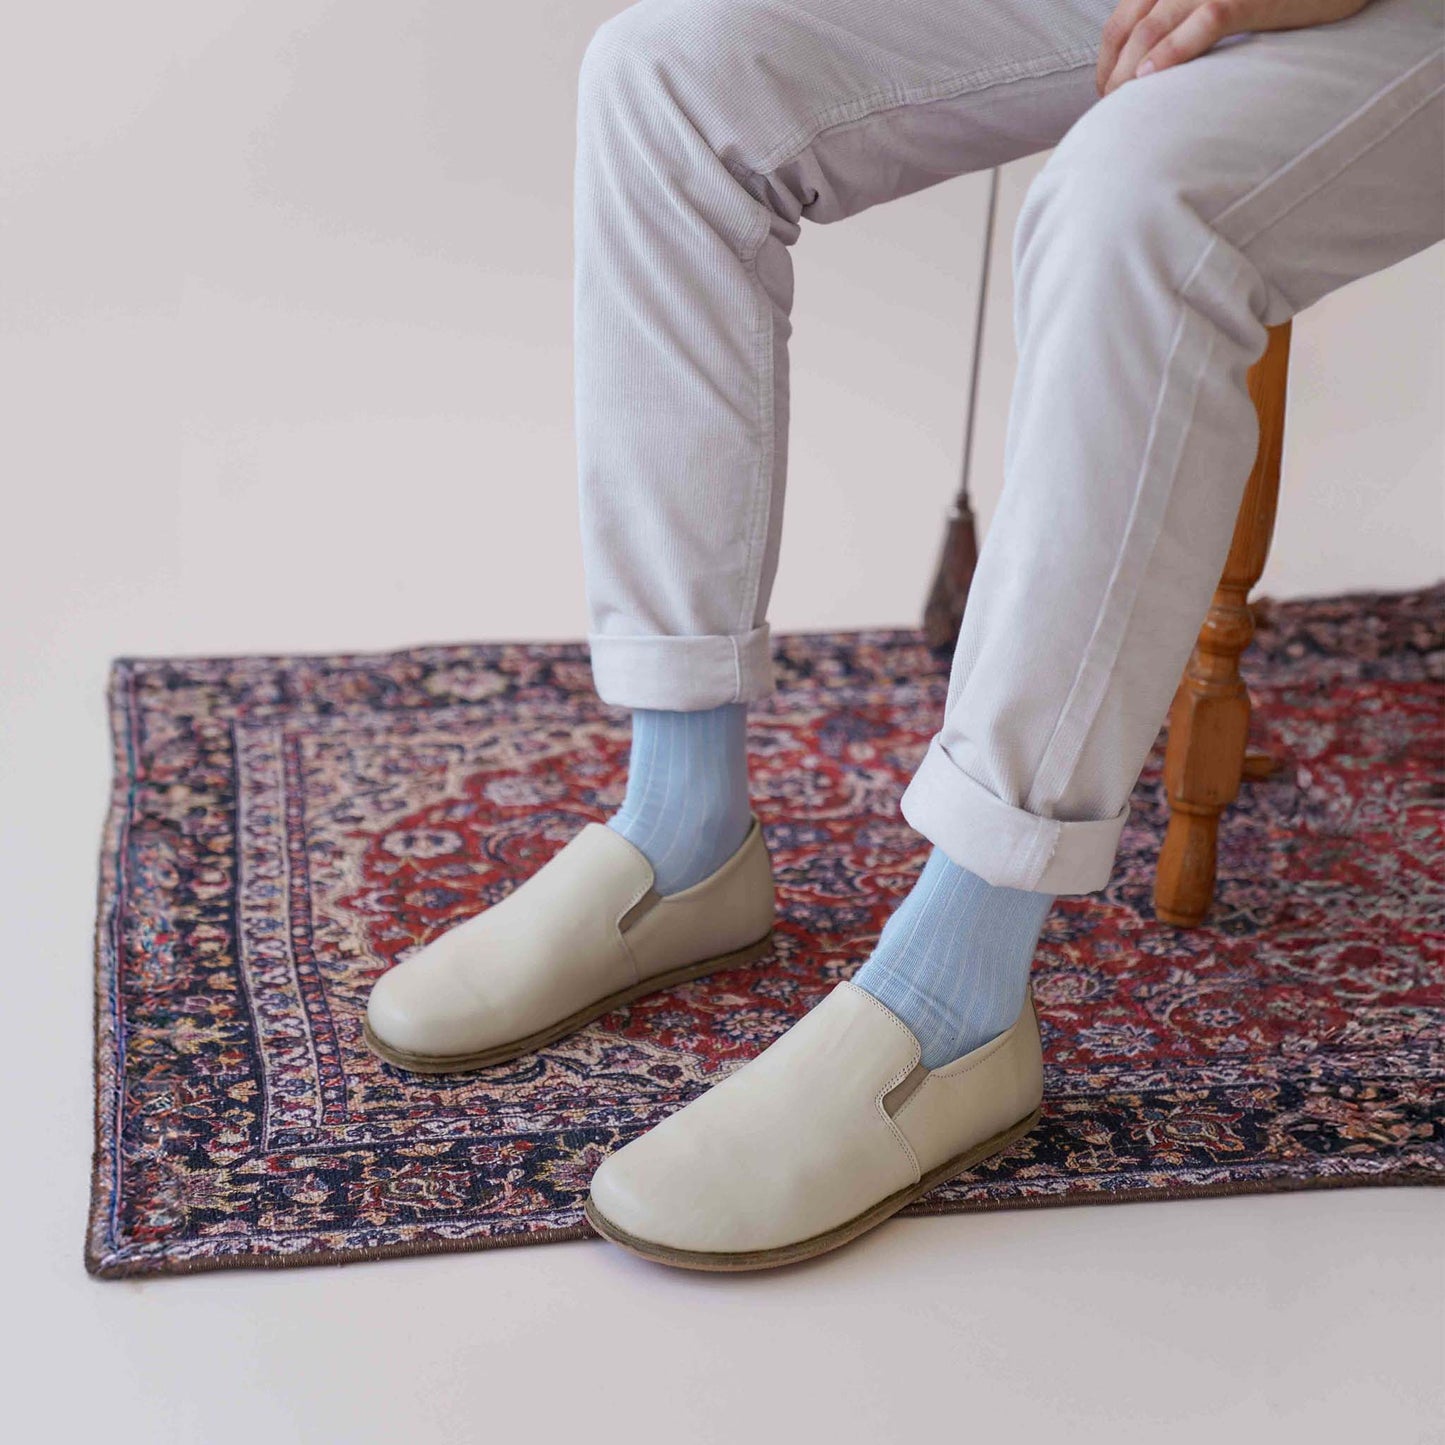 Ionia Leather Barefoot Men Loafers in beige on a patterned rug, showcasing the natural fit and minimalist design.